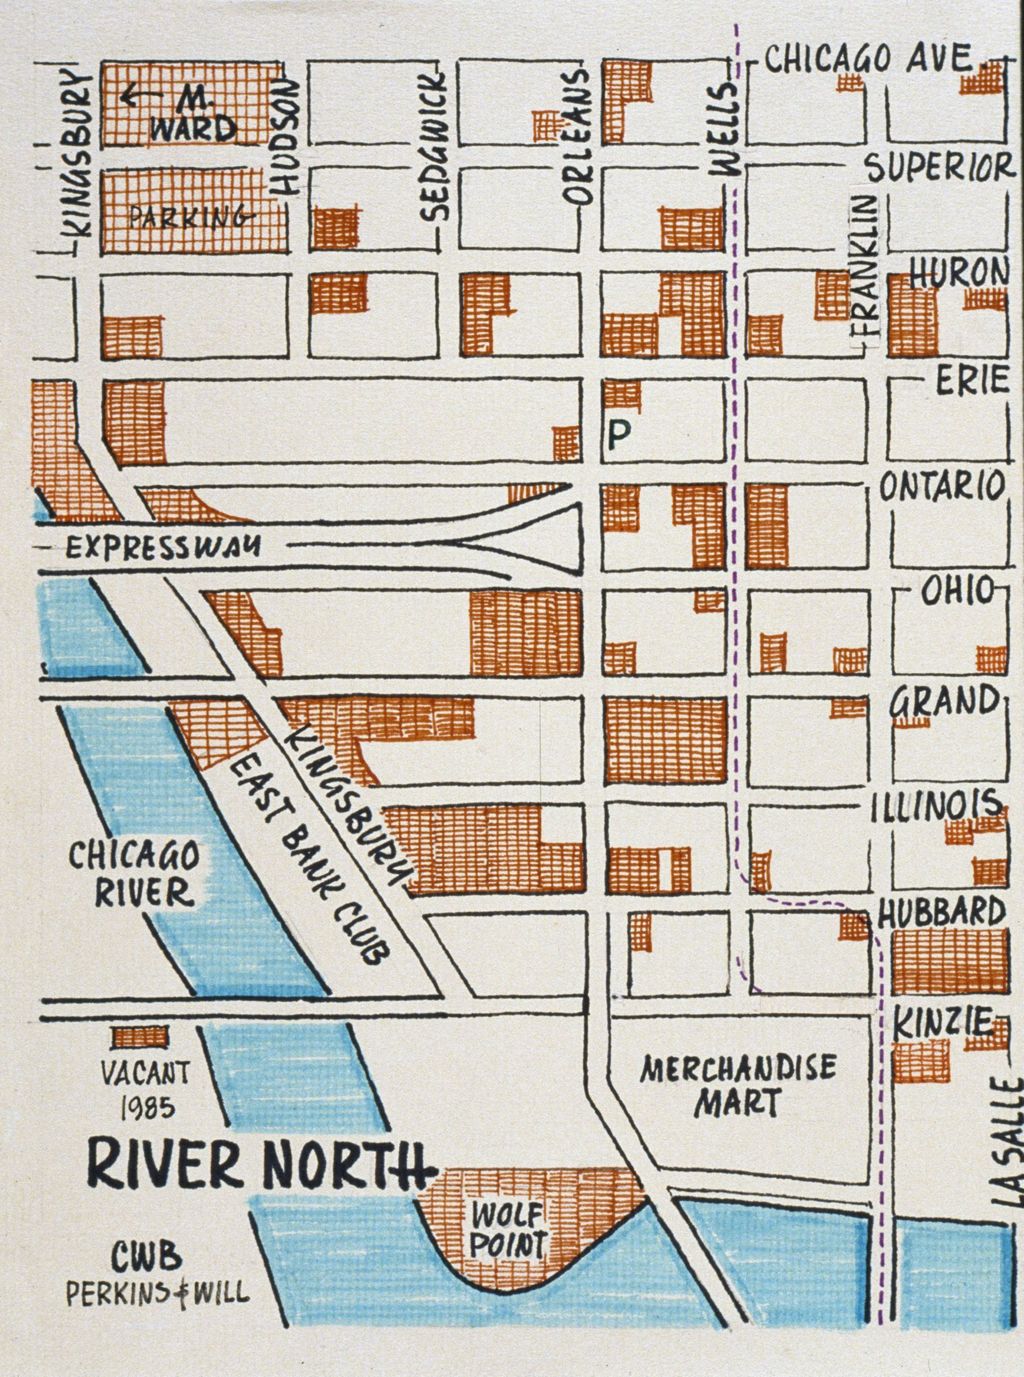 Miniature of Vacant land in River North, 1985